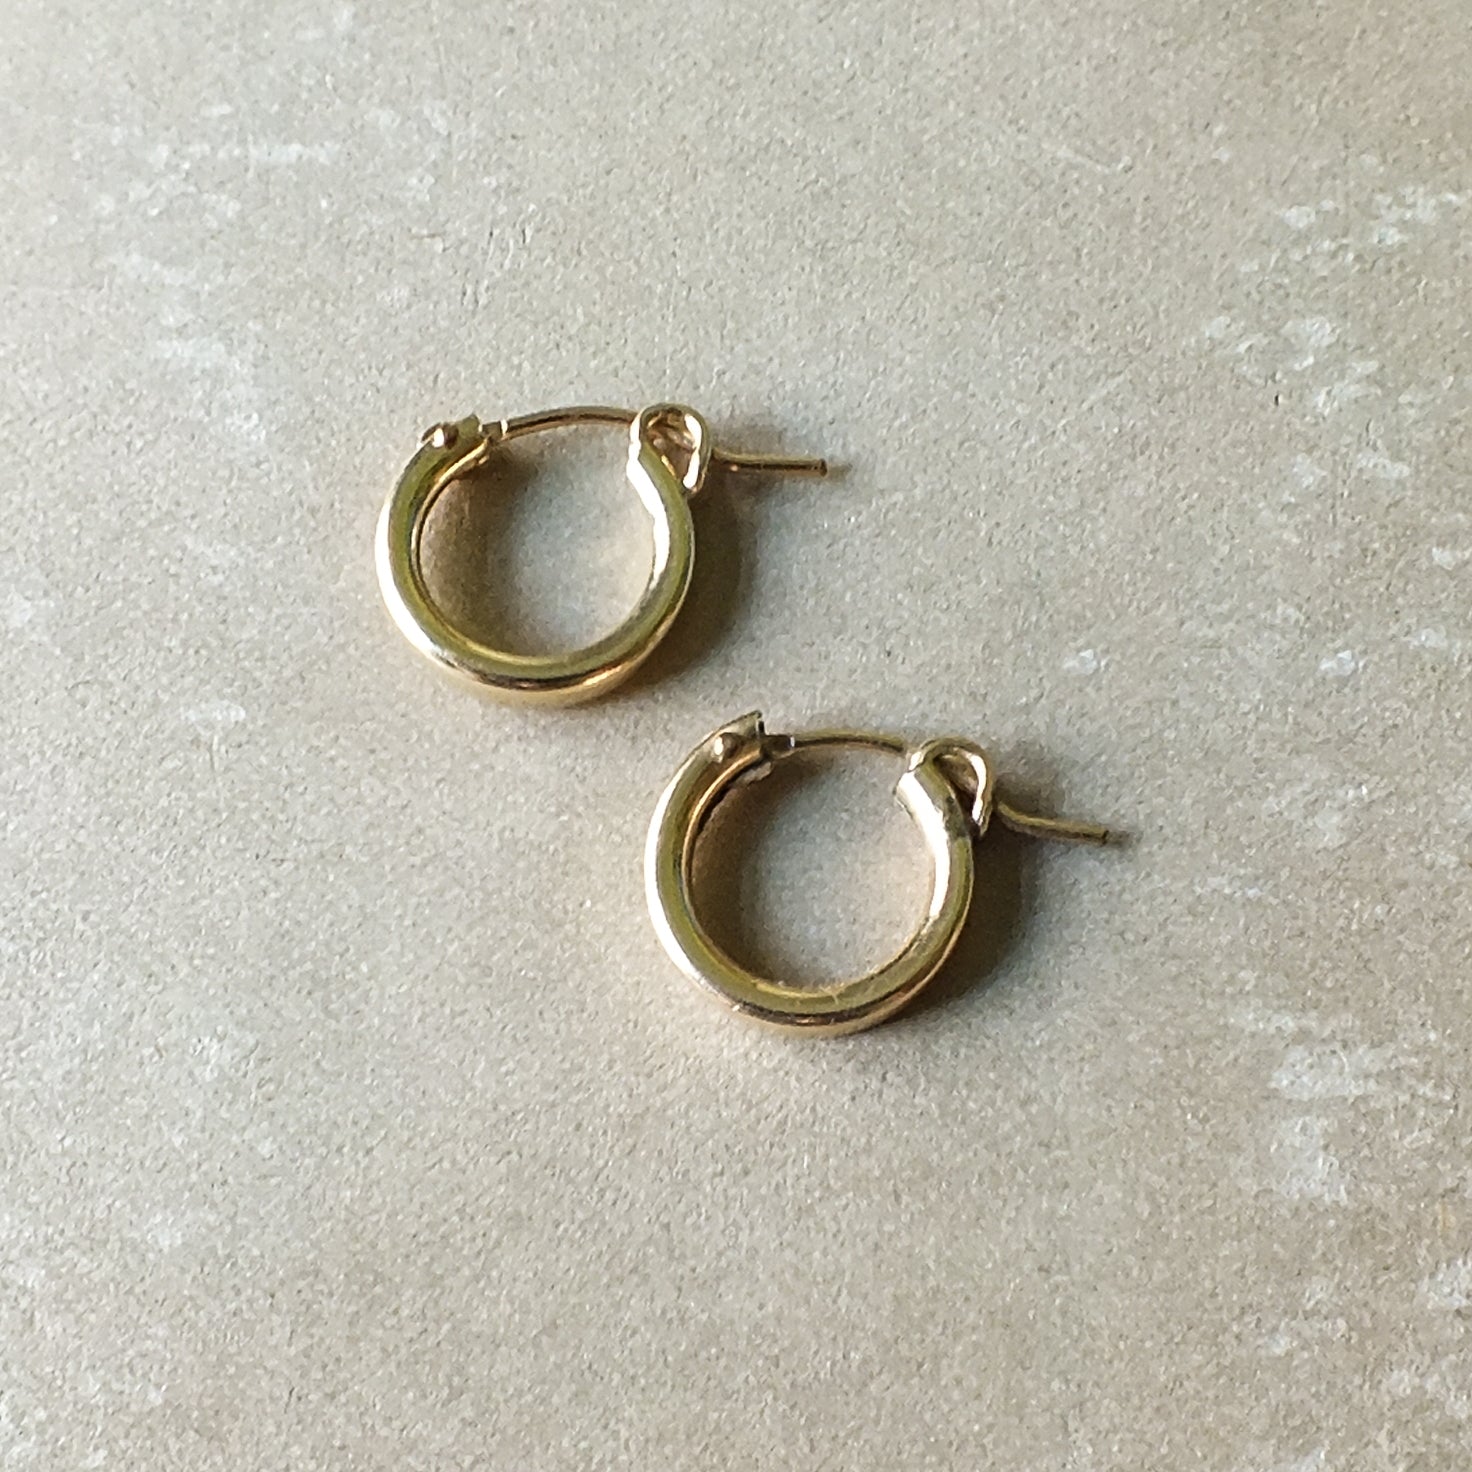 A pair of Becoming Jewelry Everyday Hoop Earrings, small on a gray surface.